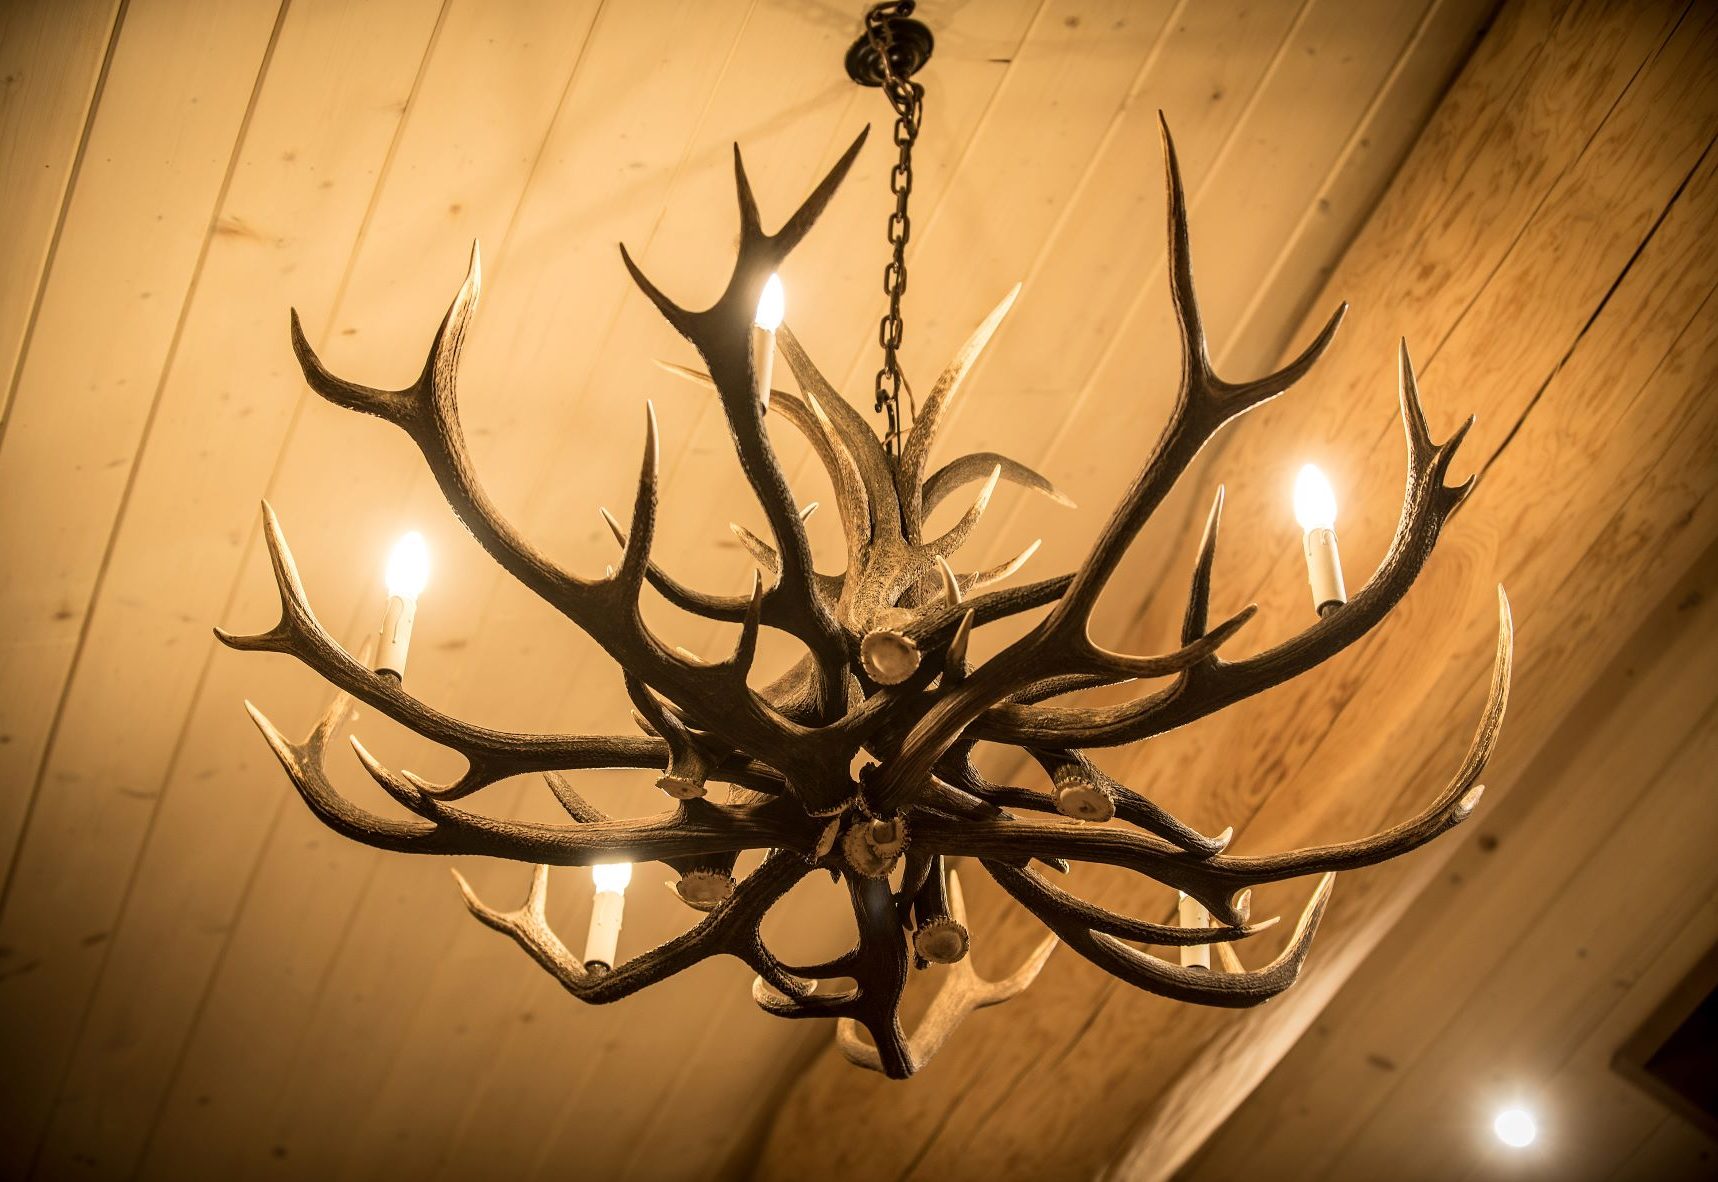 A chandelier made of stag antlers